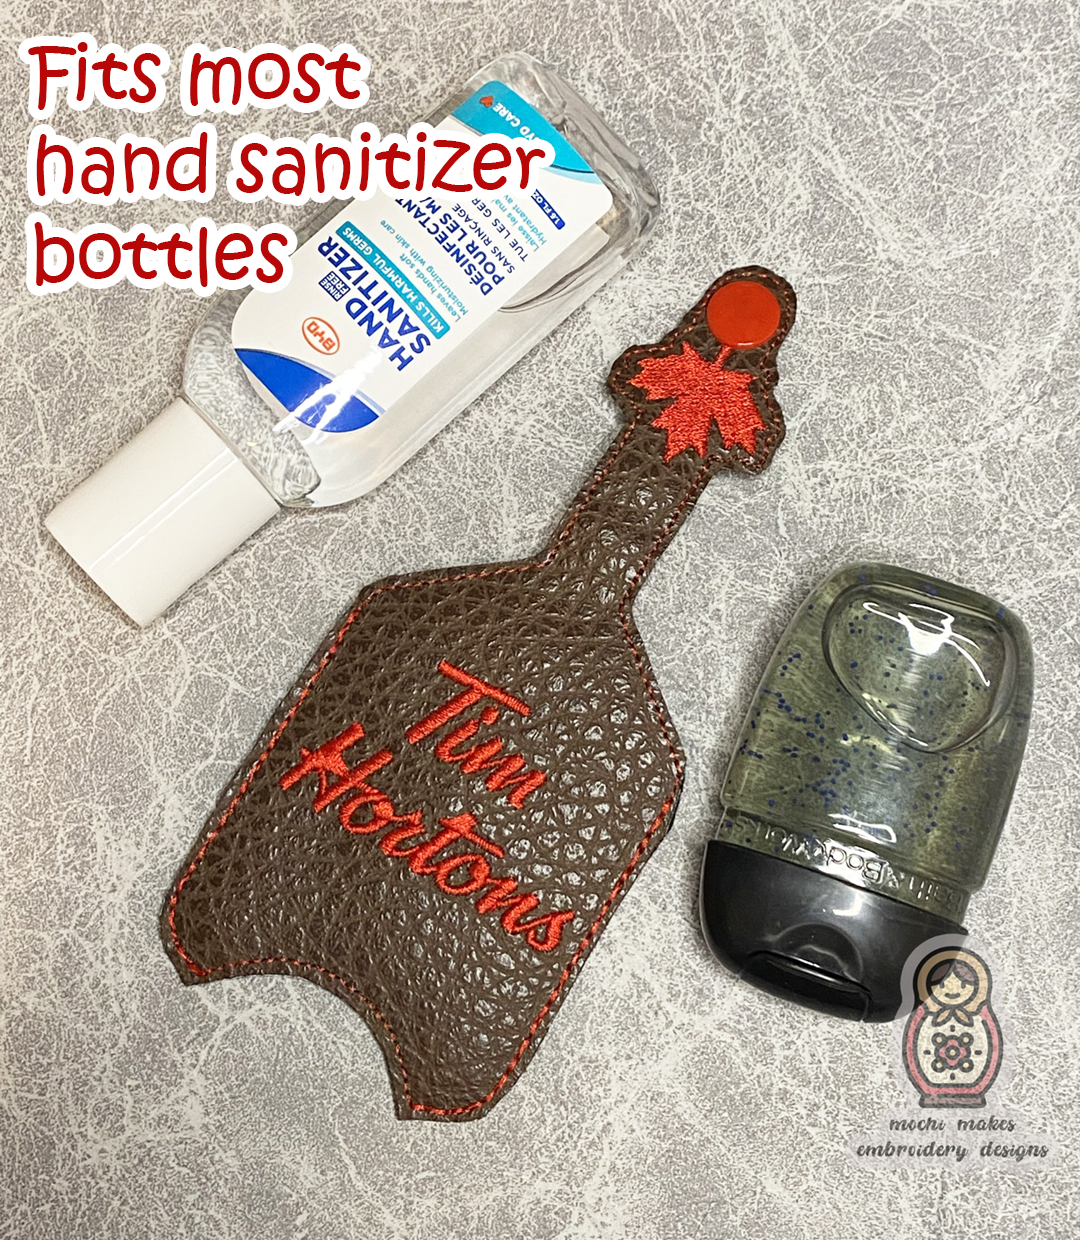 Tim Hortons ITH Hand Sanitizer Keychain 5x7 Canada Canadian Canuck Coffee Timbit Machine Embroidery Design Digital Download File